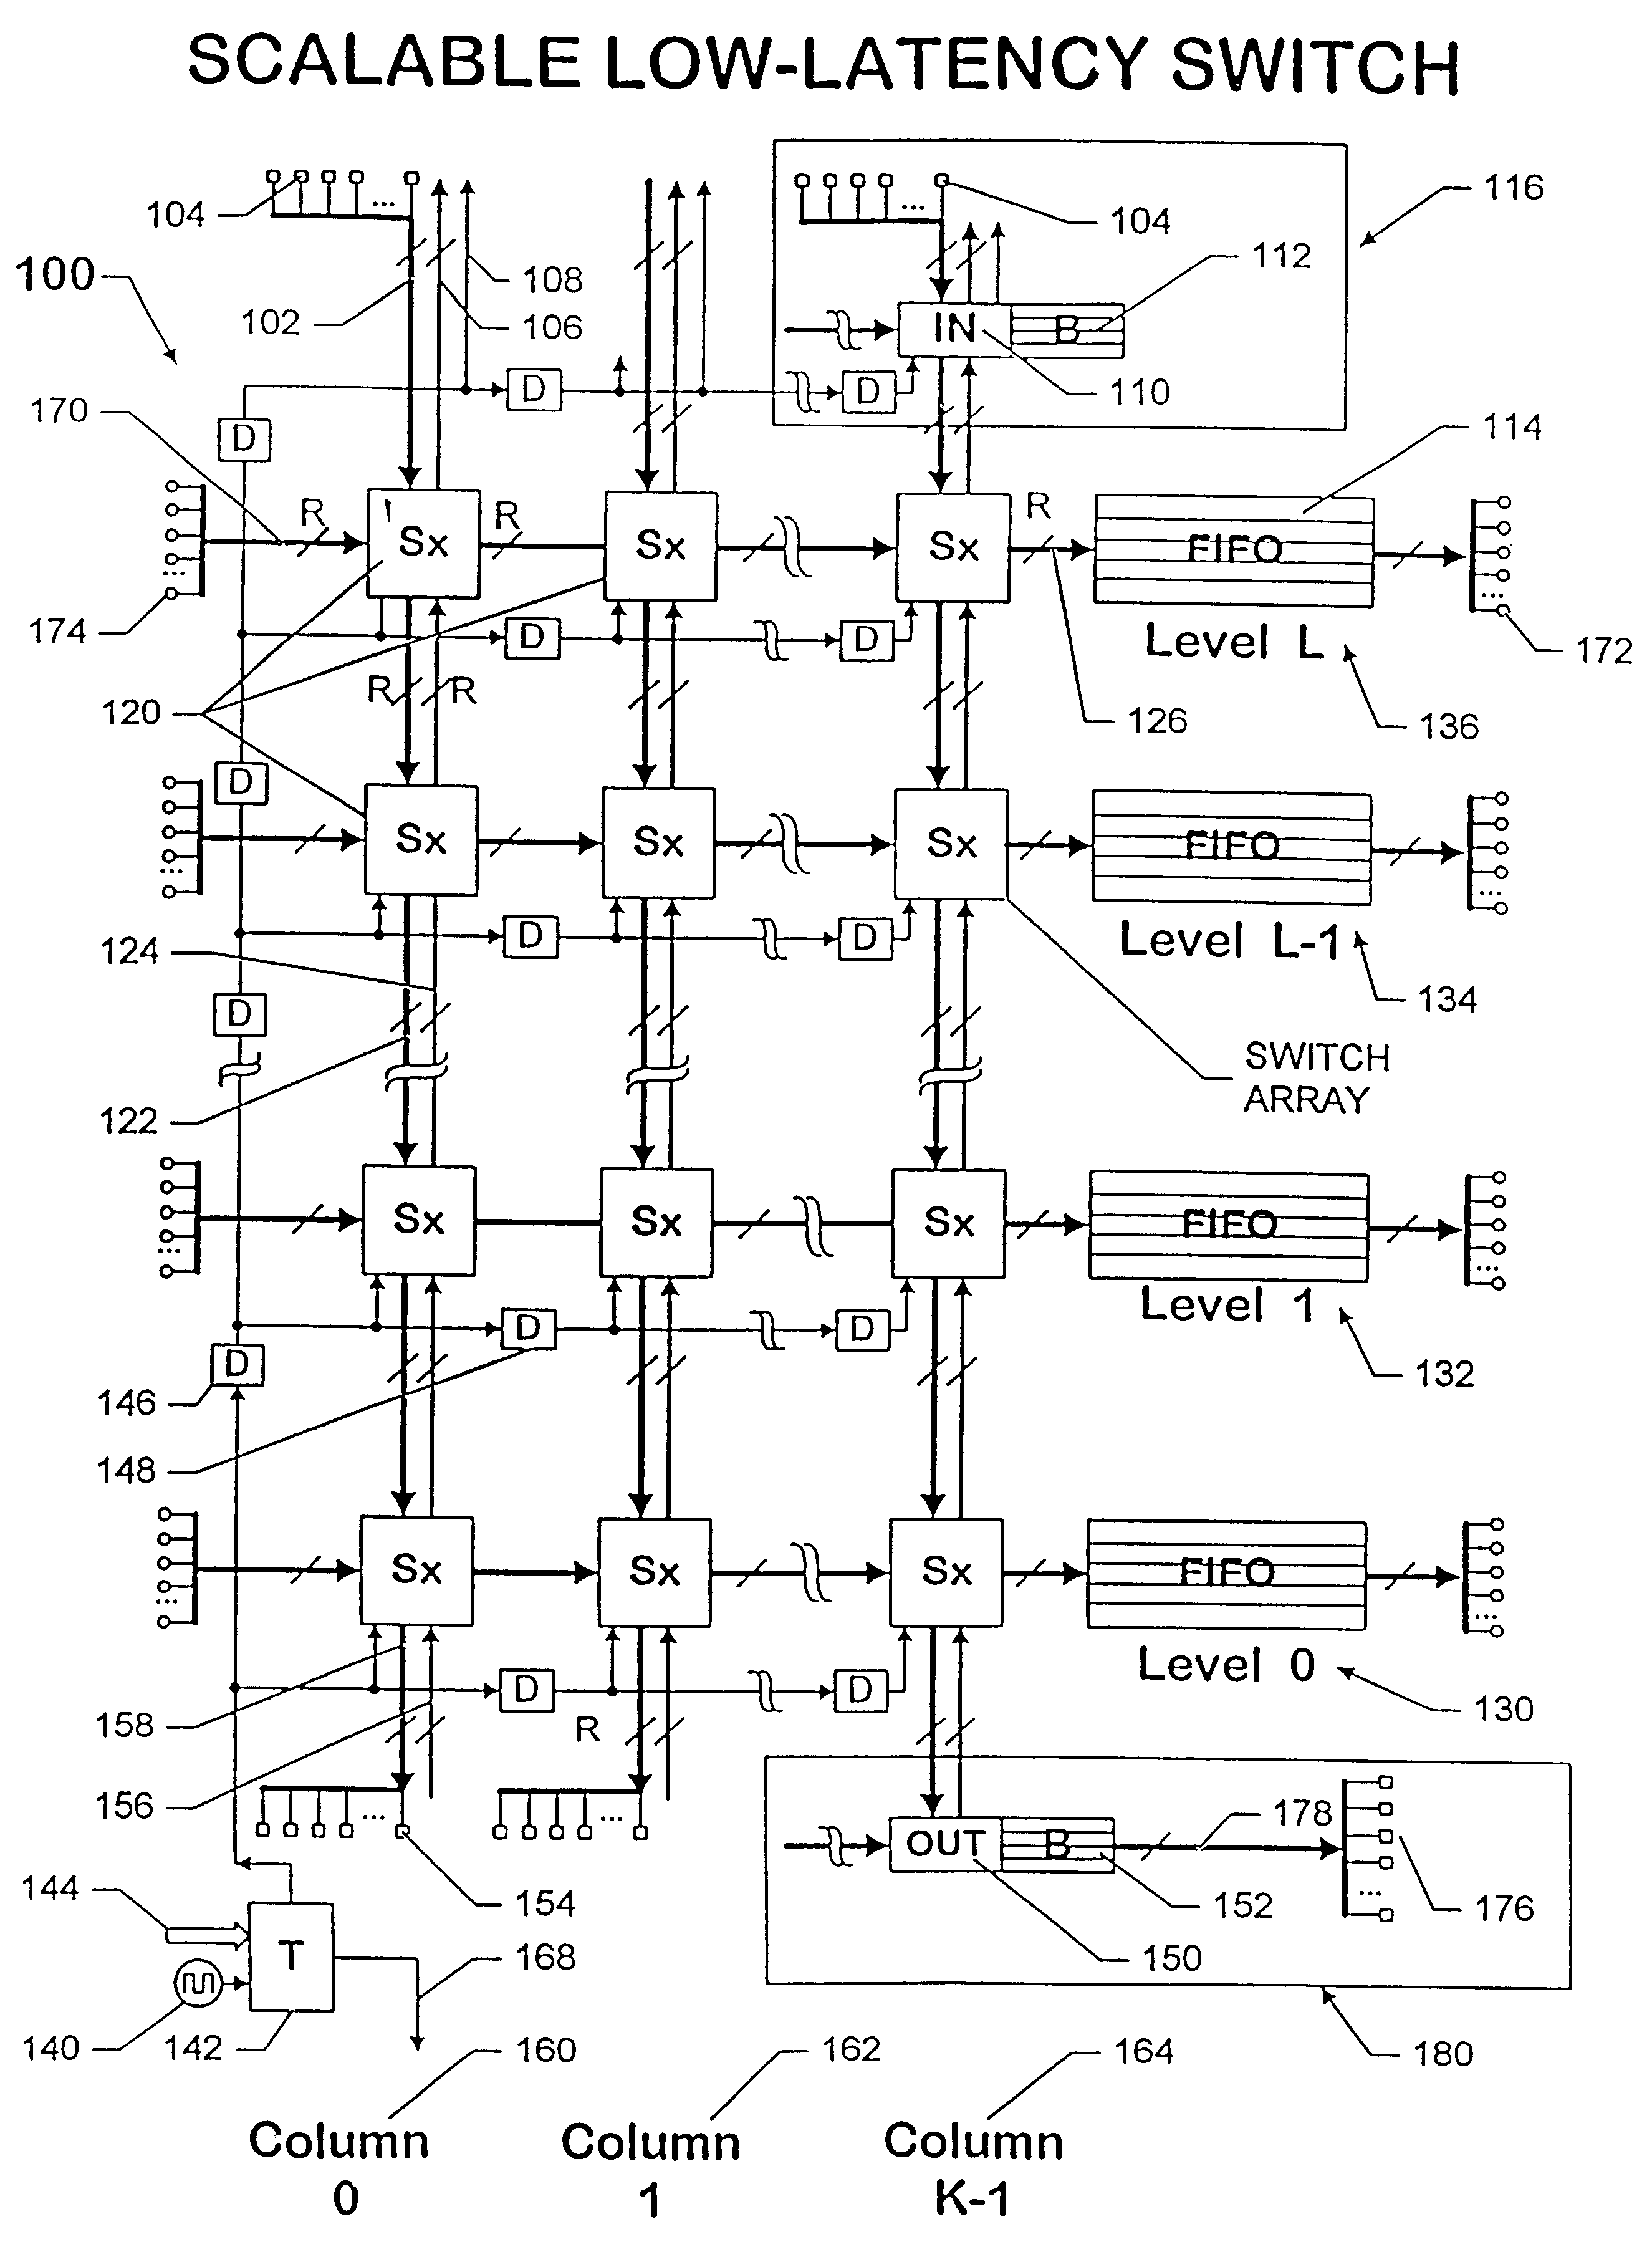 Scaleable low-latency switch for usage in an interconnect structure